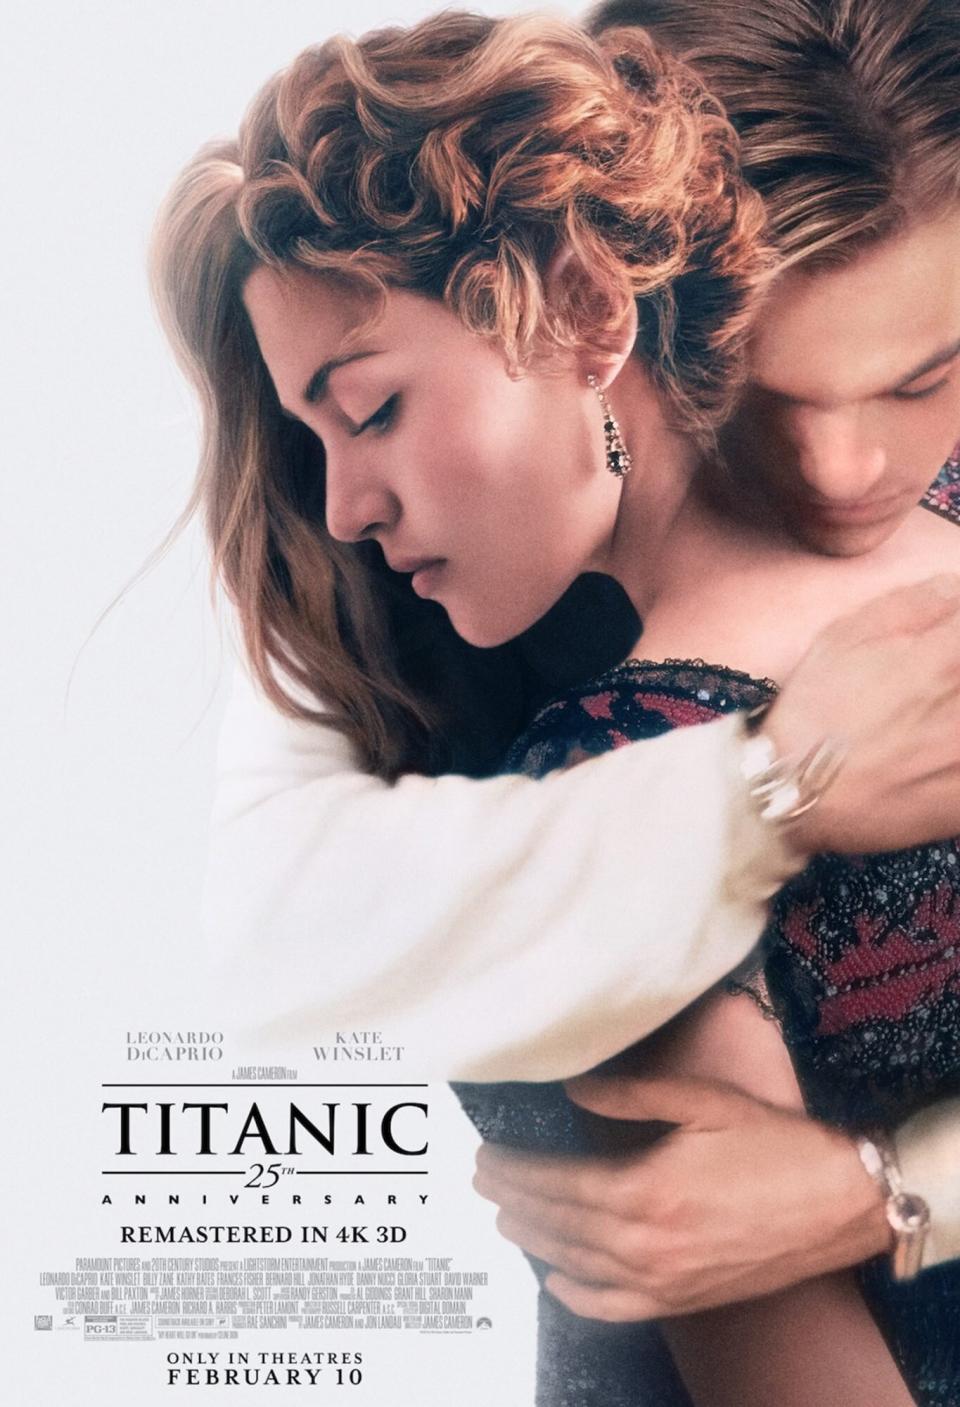 25th Anniversary Re-Release of "Titanic" Poster Art